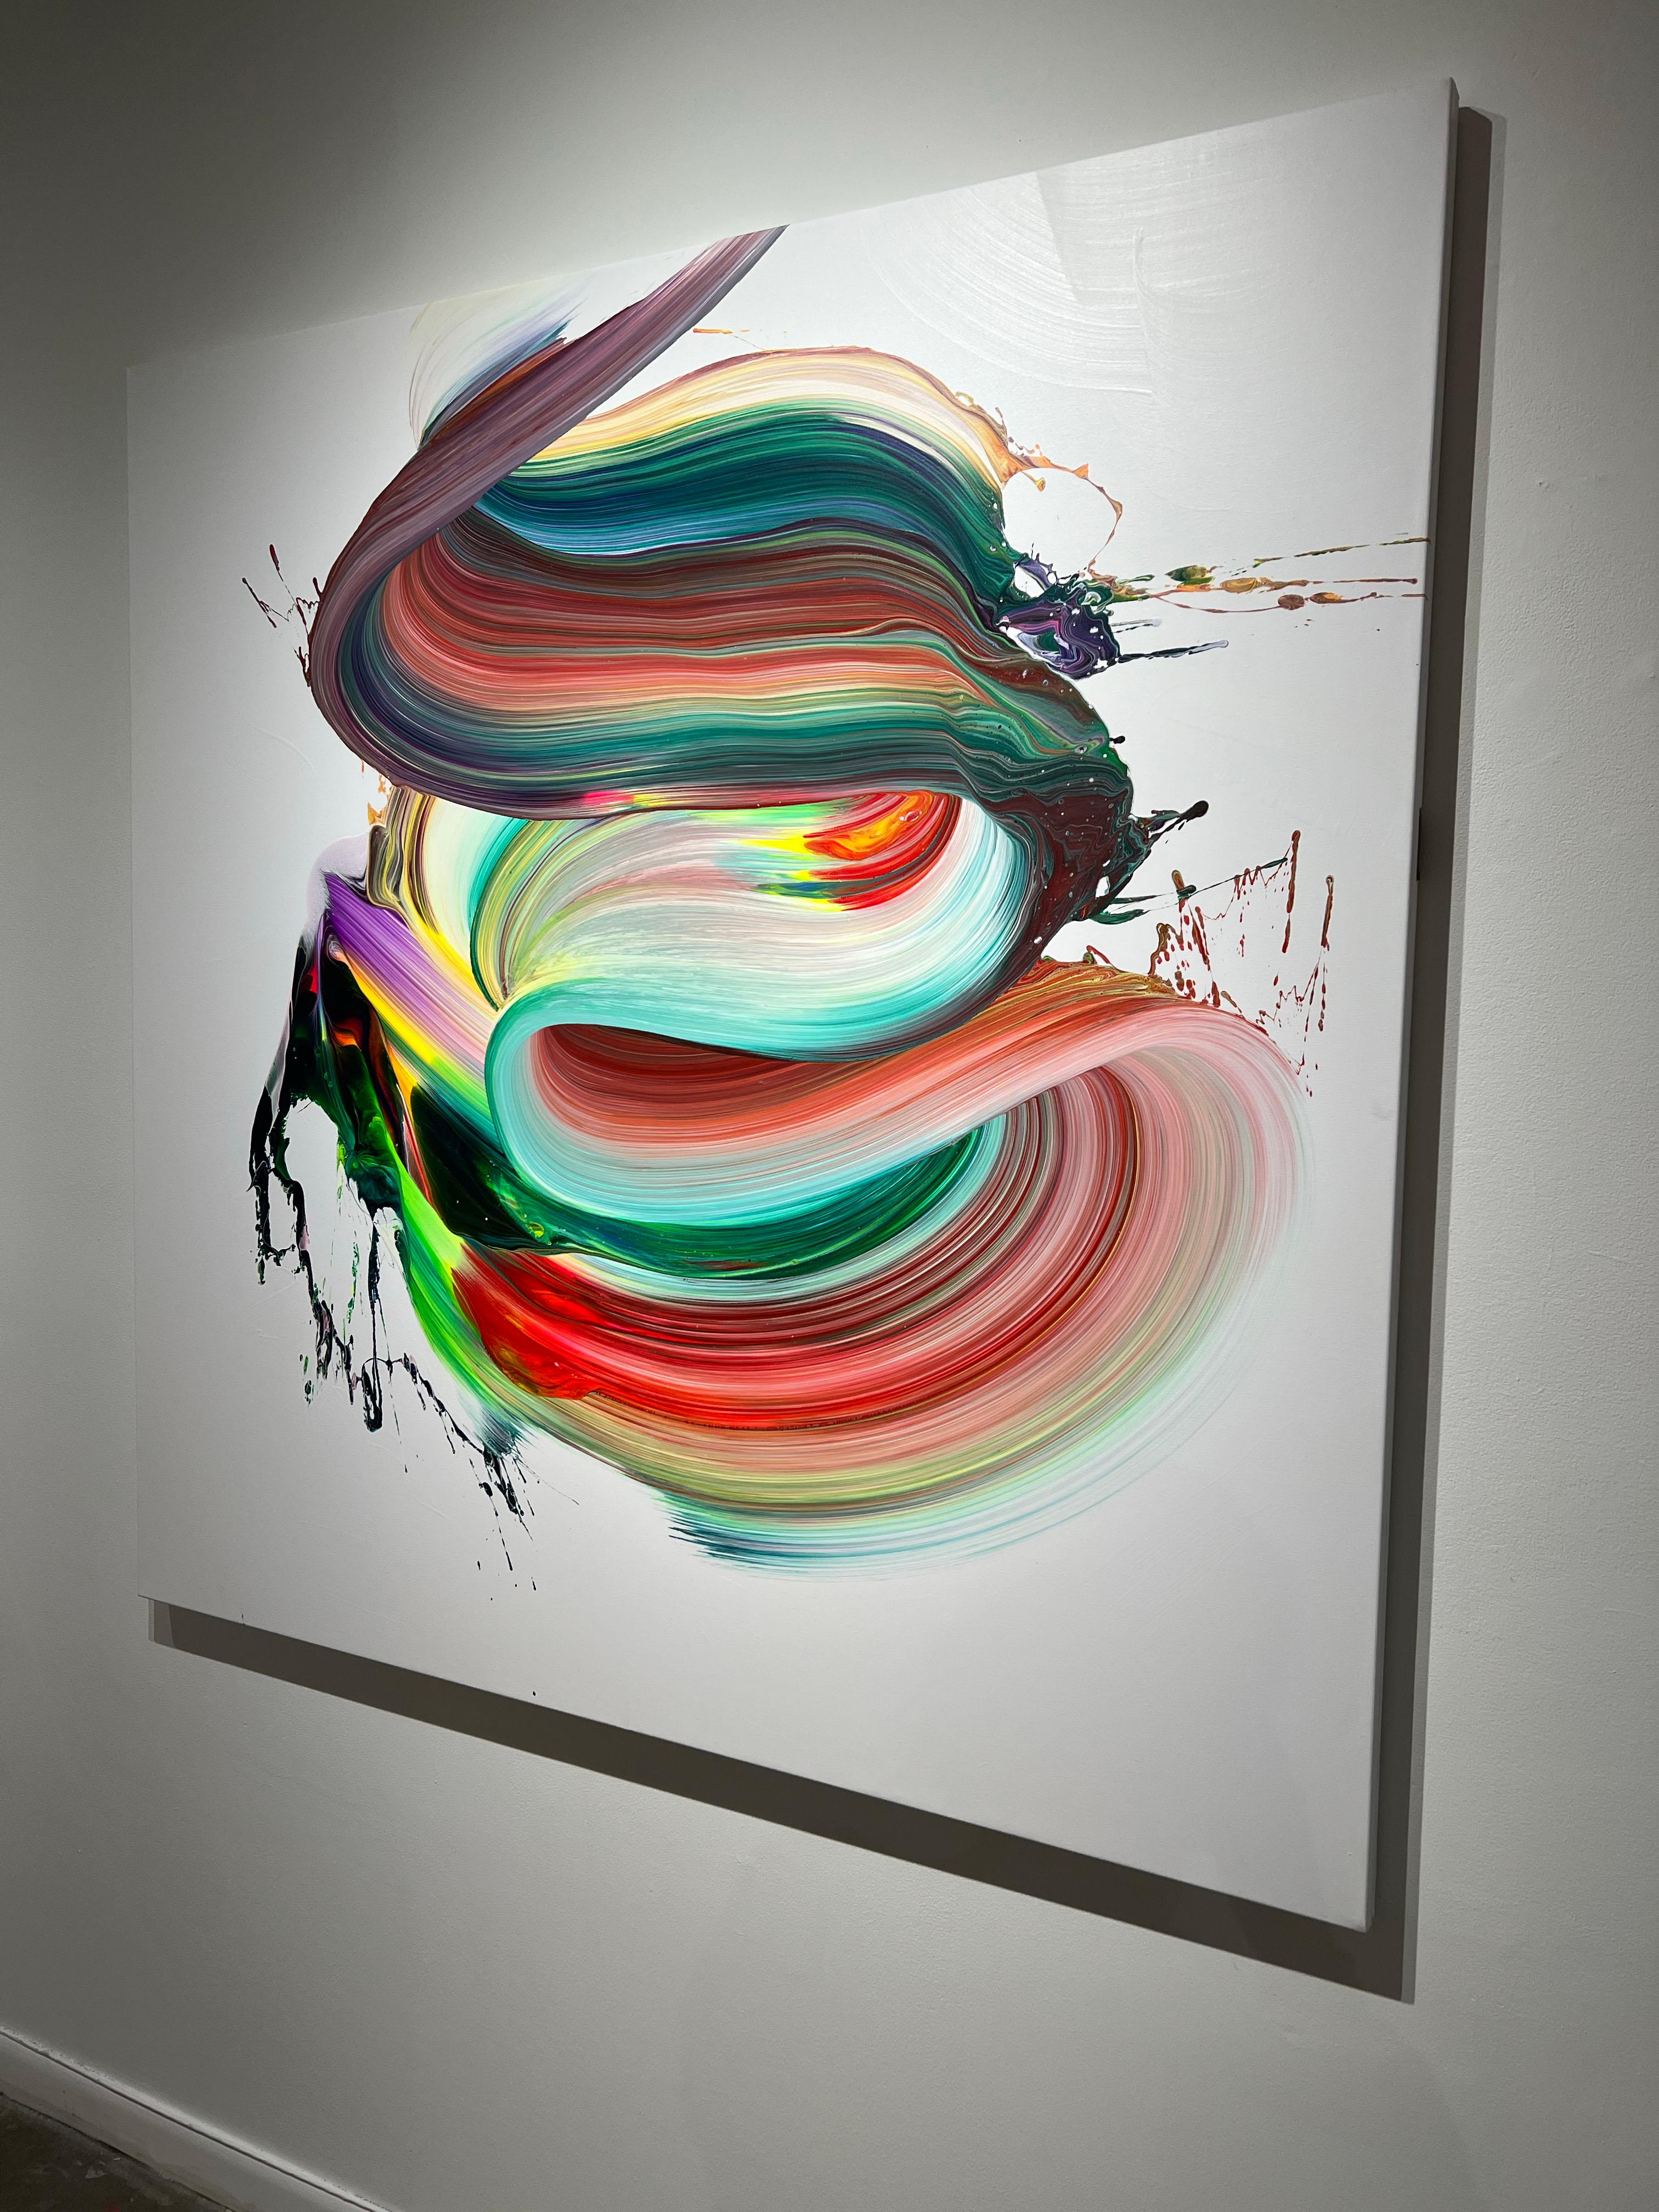 AV 863 -  A Liquid Abstraction in Red, Green, and Purple - Gray Abstract Painting by Alex Voinea